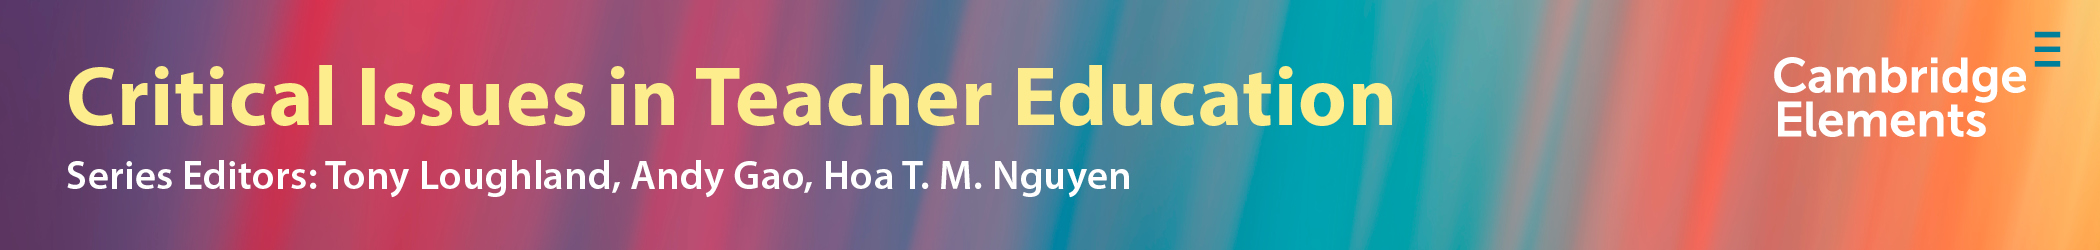 Critican Issues in Teacher Education. Series Editors: Tony Loughland, Andy Gao, Hoa T. M. Nguyen.